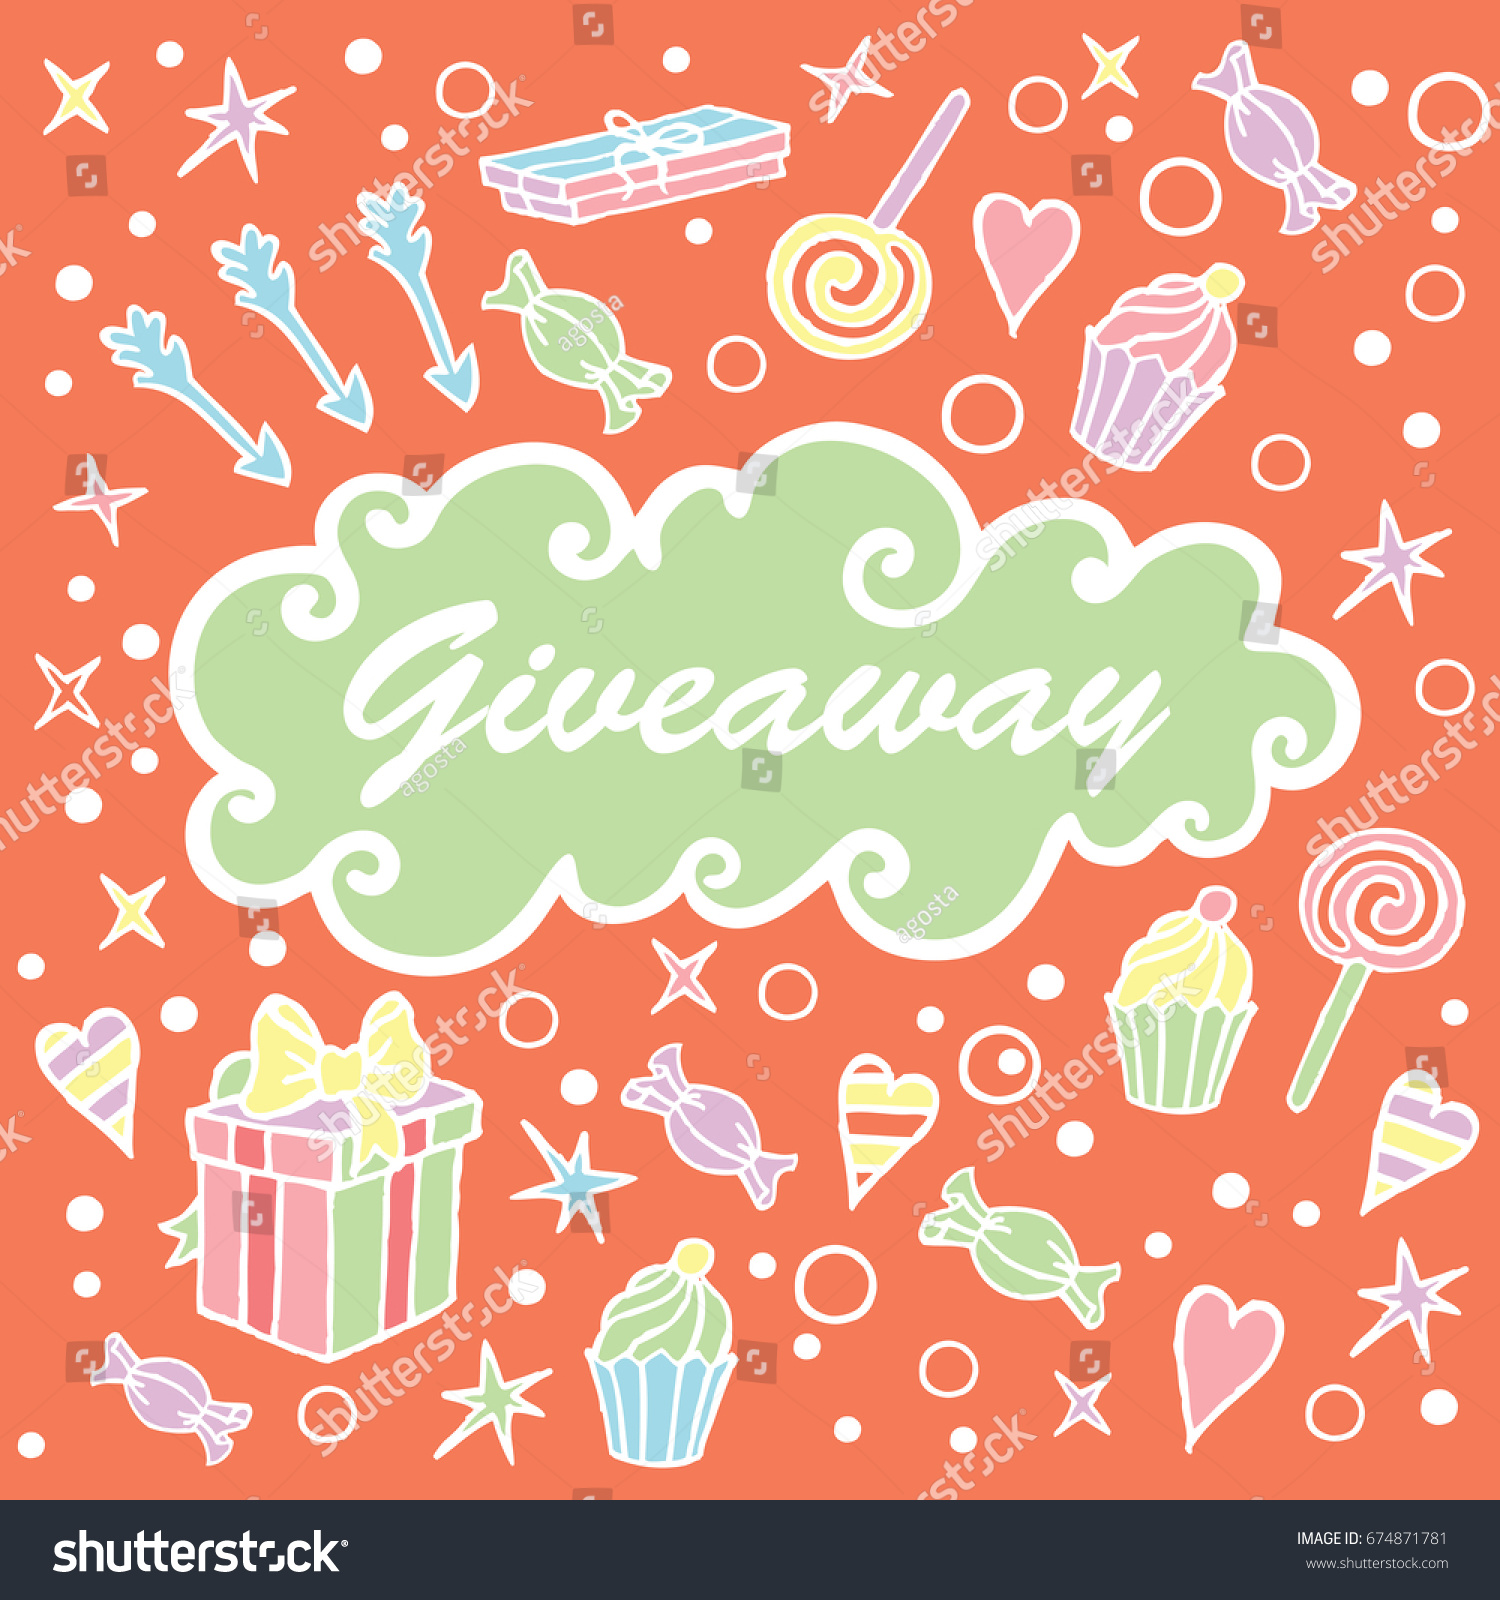 Giveaway, banner with cloud on the orange background / Giveaway banner, freehand style, great for social media #674871781